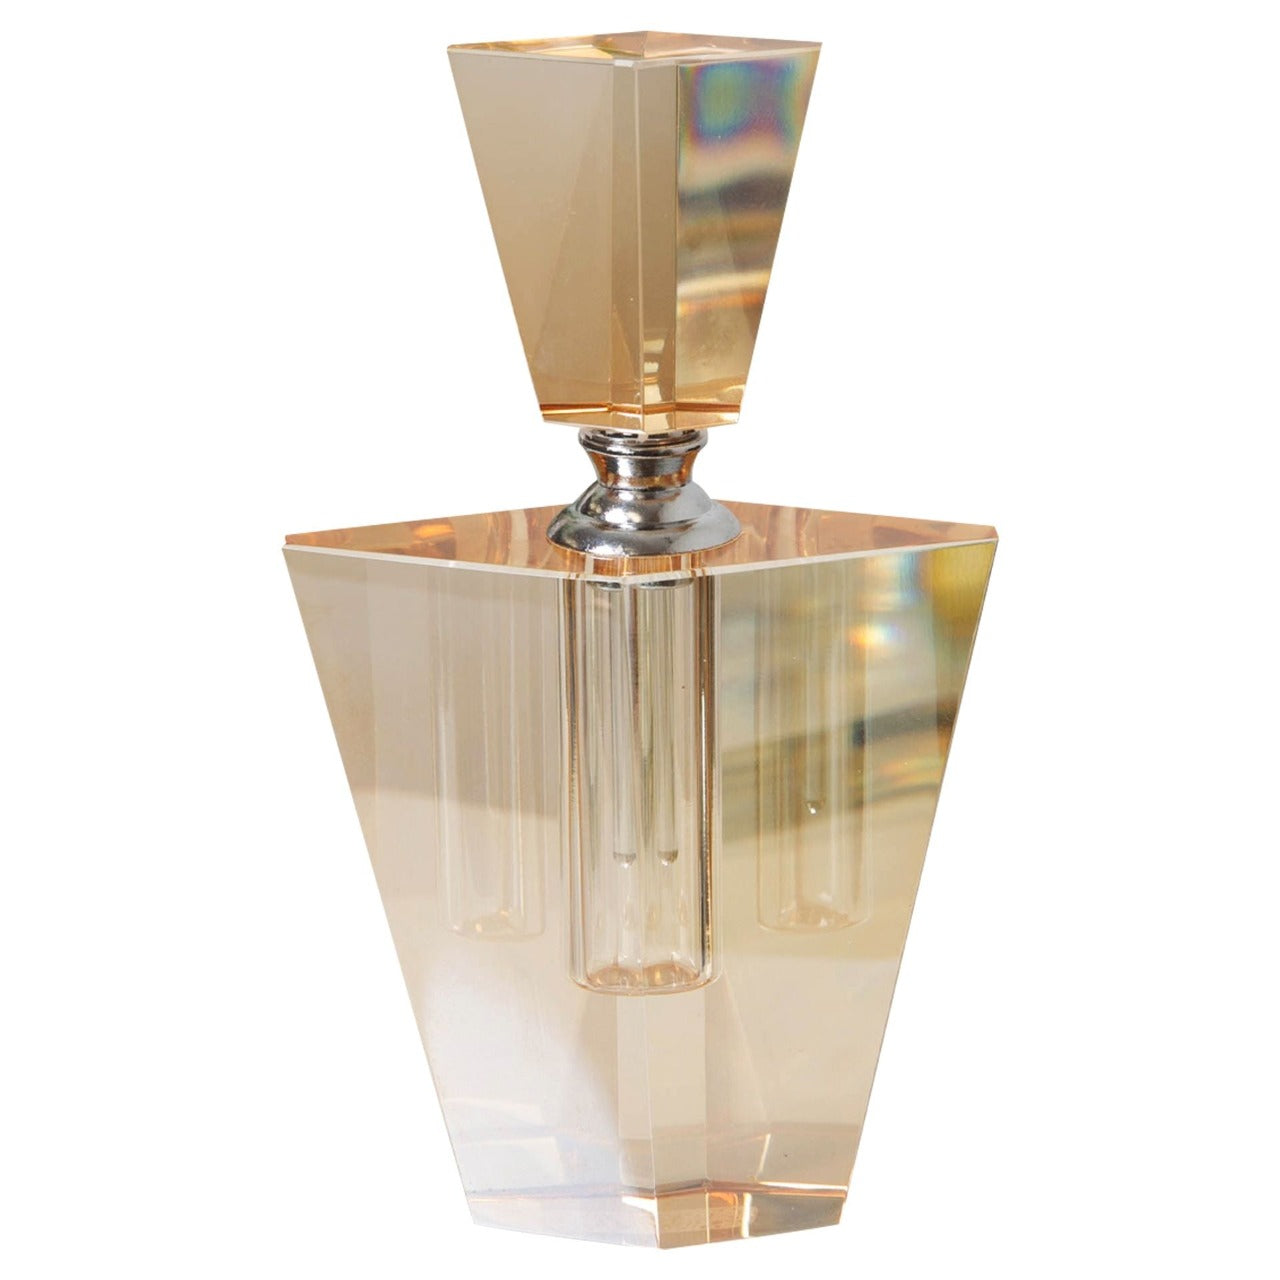 Estella Champagne Finish Glass Perfume Bottler  Bring some art deco elegance to your dressing table with this heavy champagne gold glass perfume bottle. From Estella by SOPHIA® - Champagne Chic women's home and gift evoking the luxurious spirit of the art deco era.